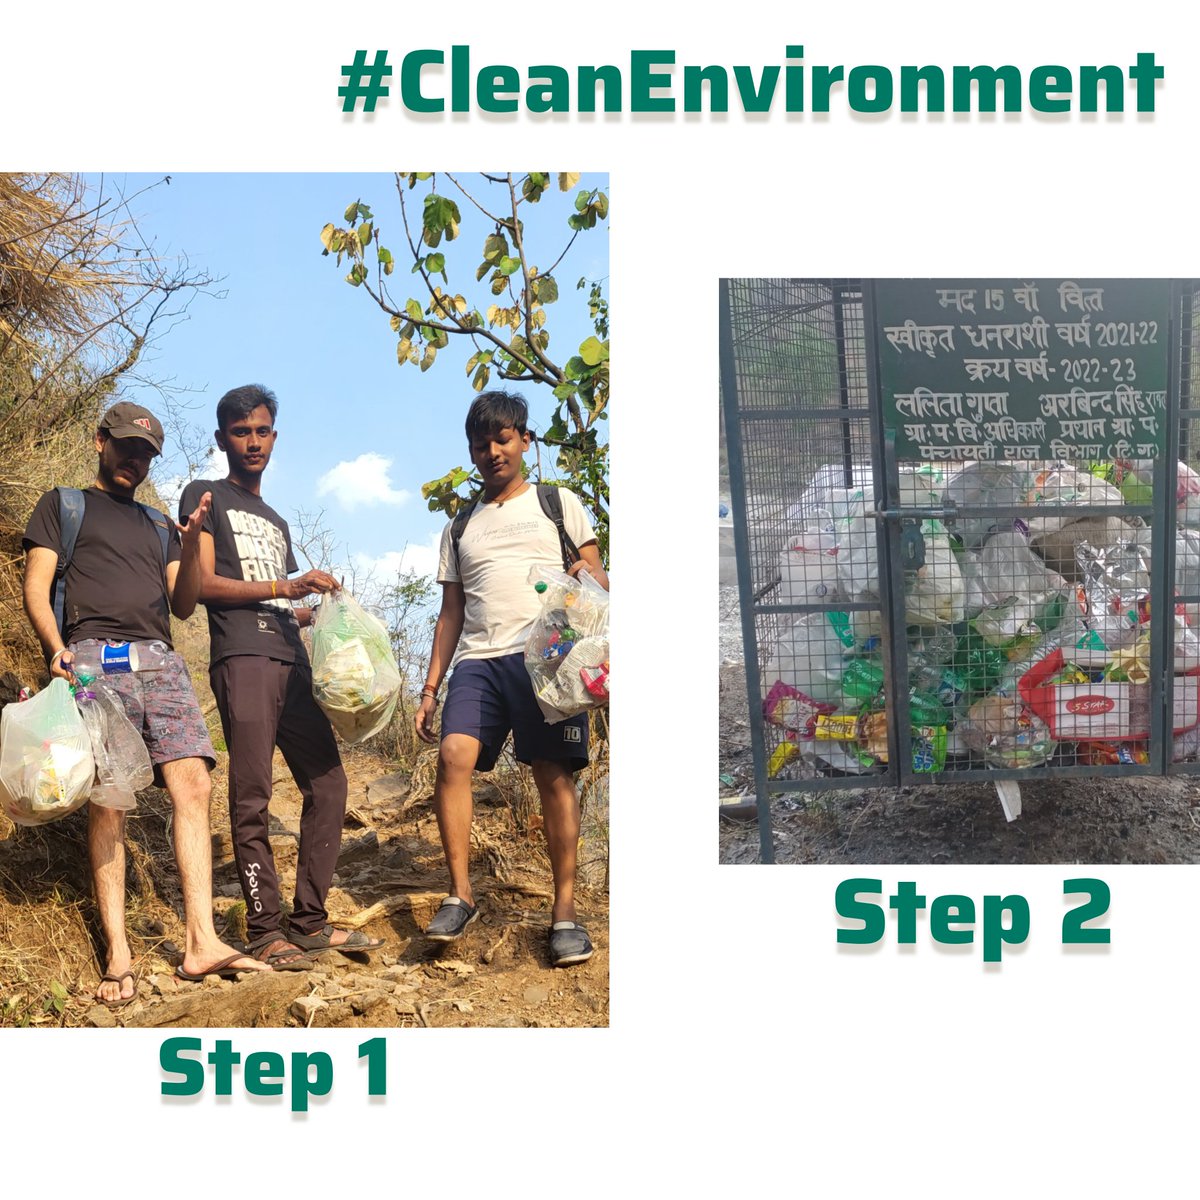 It feels so Good 😊 , do it as your duty Follow these small effective Steps to keep our Environment Clean 🧹 Step 1 - Collect Waste Step 2 - Put it in Dustbins #cleanuttarakhand #cleanenvironment #Savenature